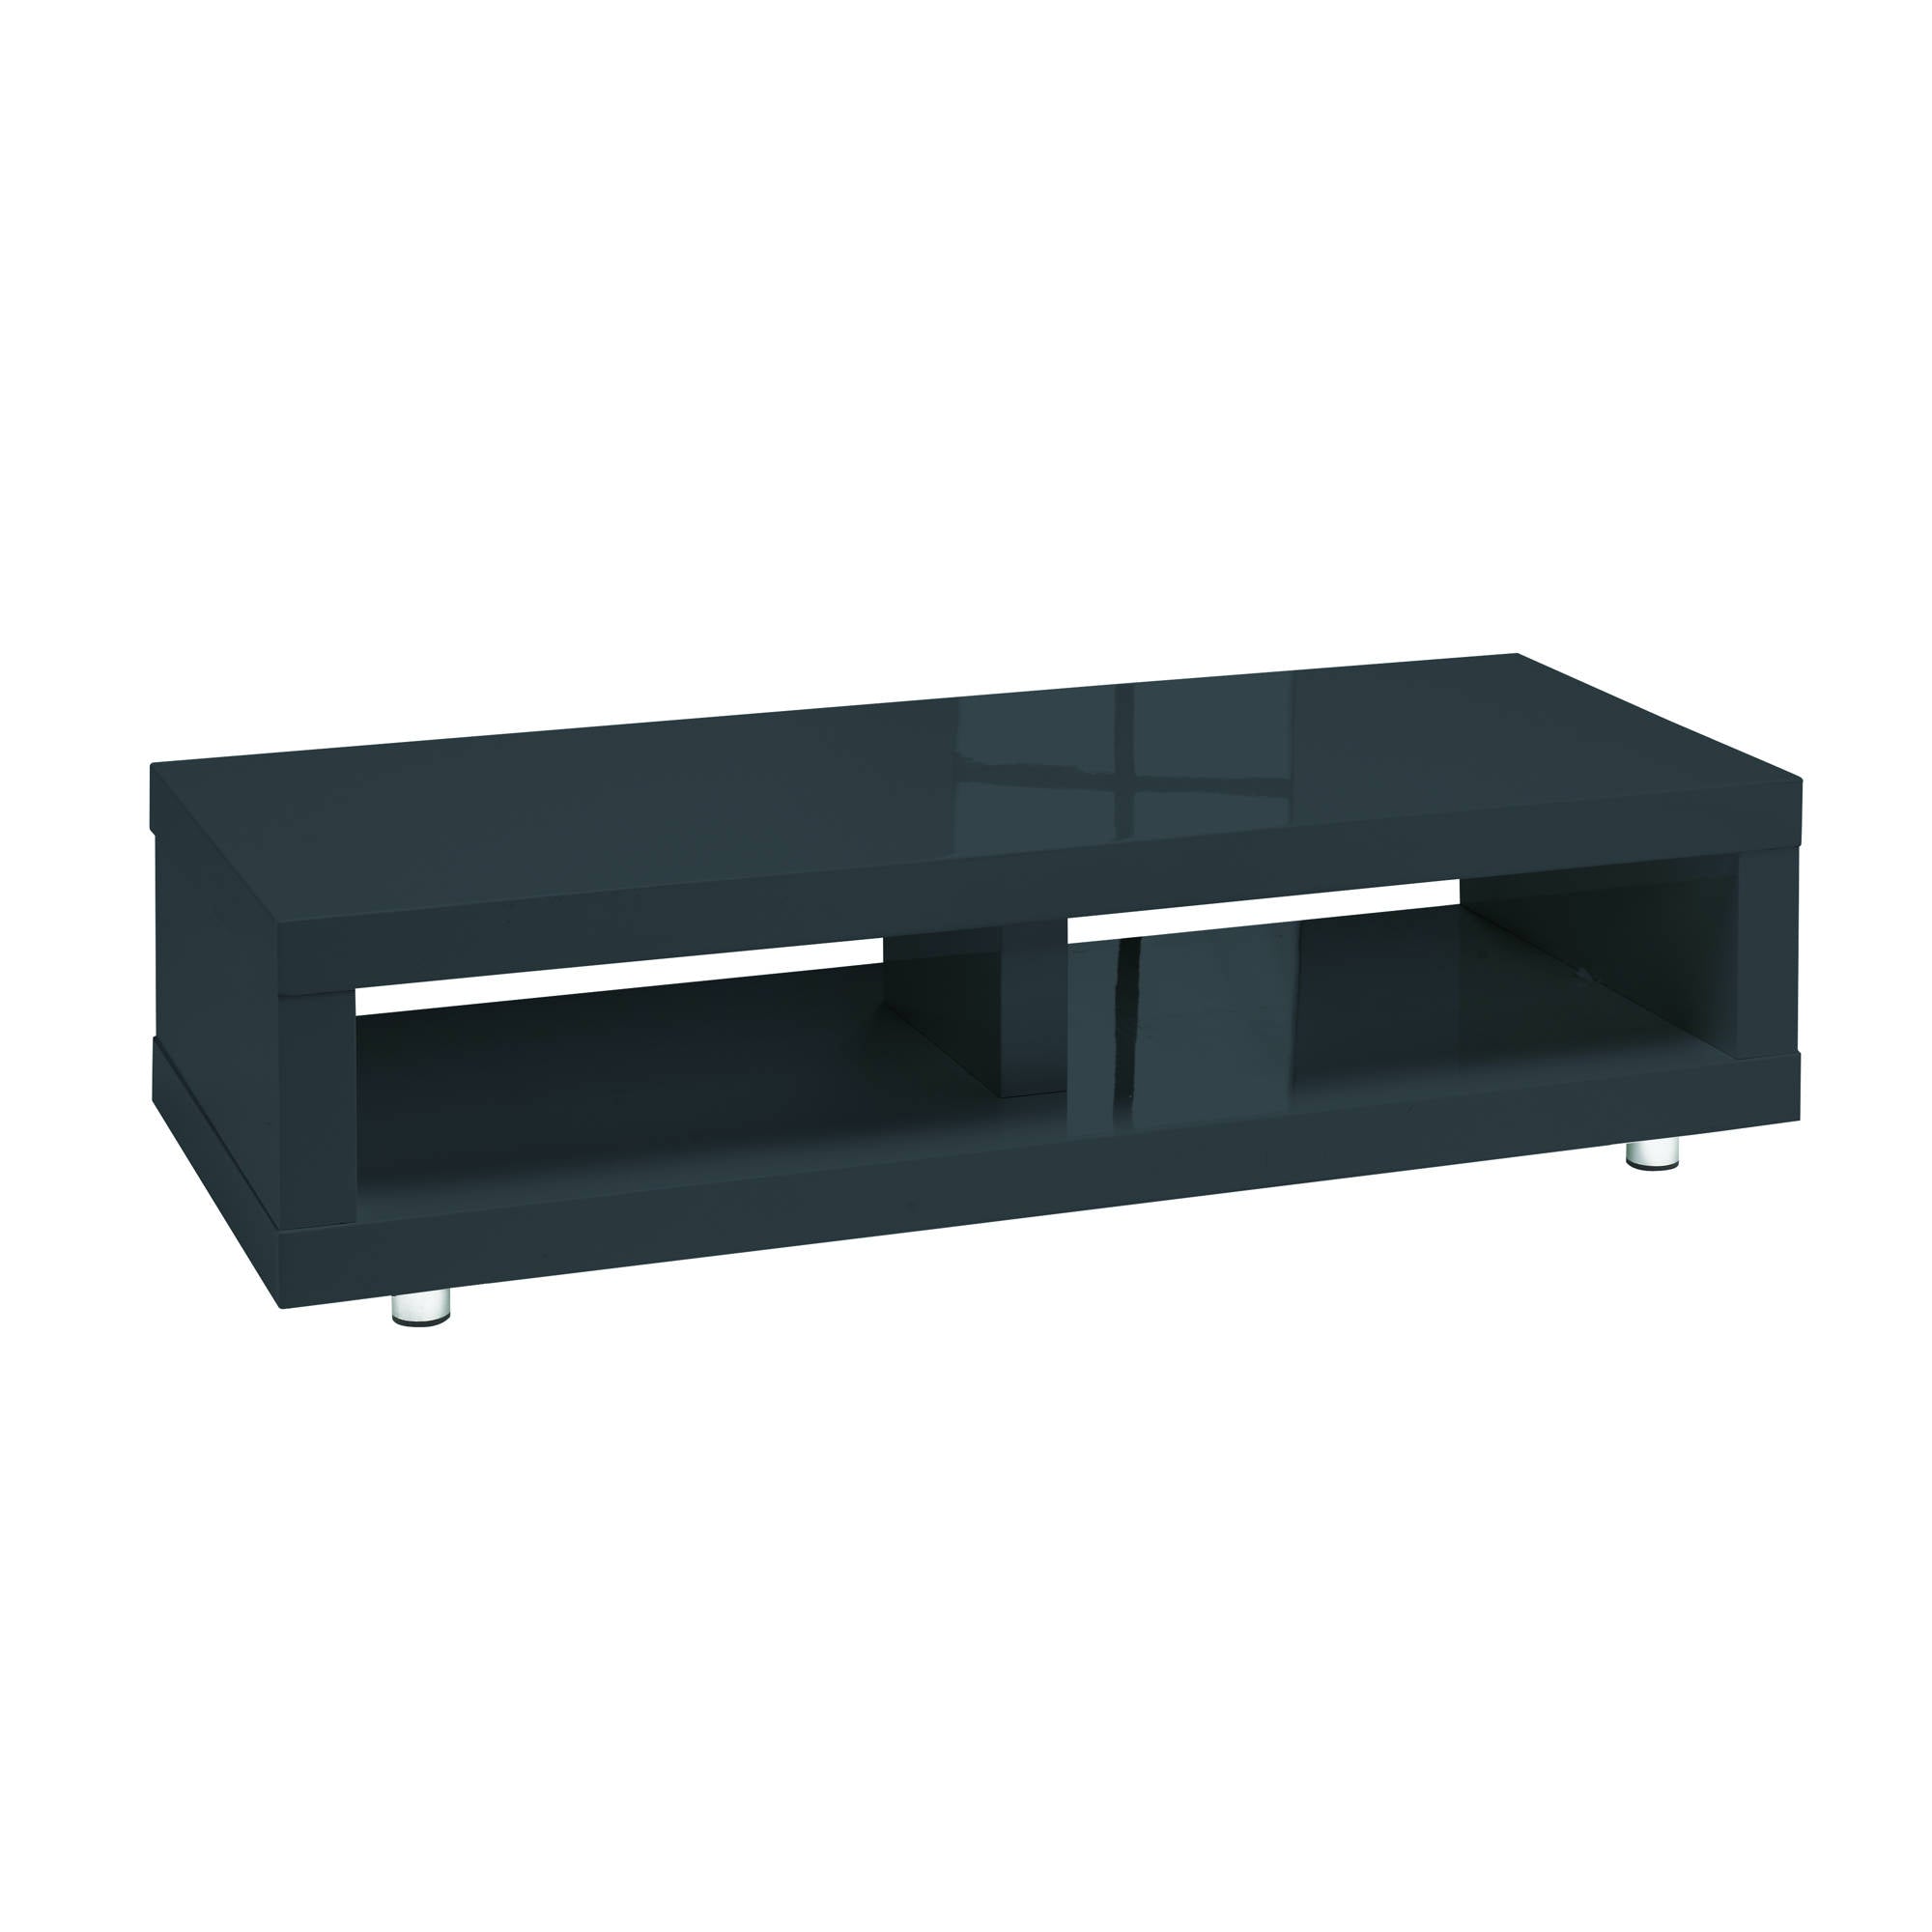 Sterling TV Media Stand in Charcoal - Ezzo